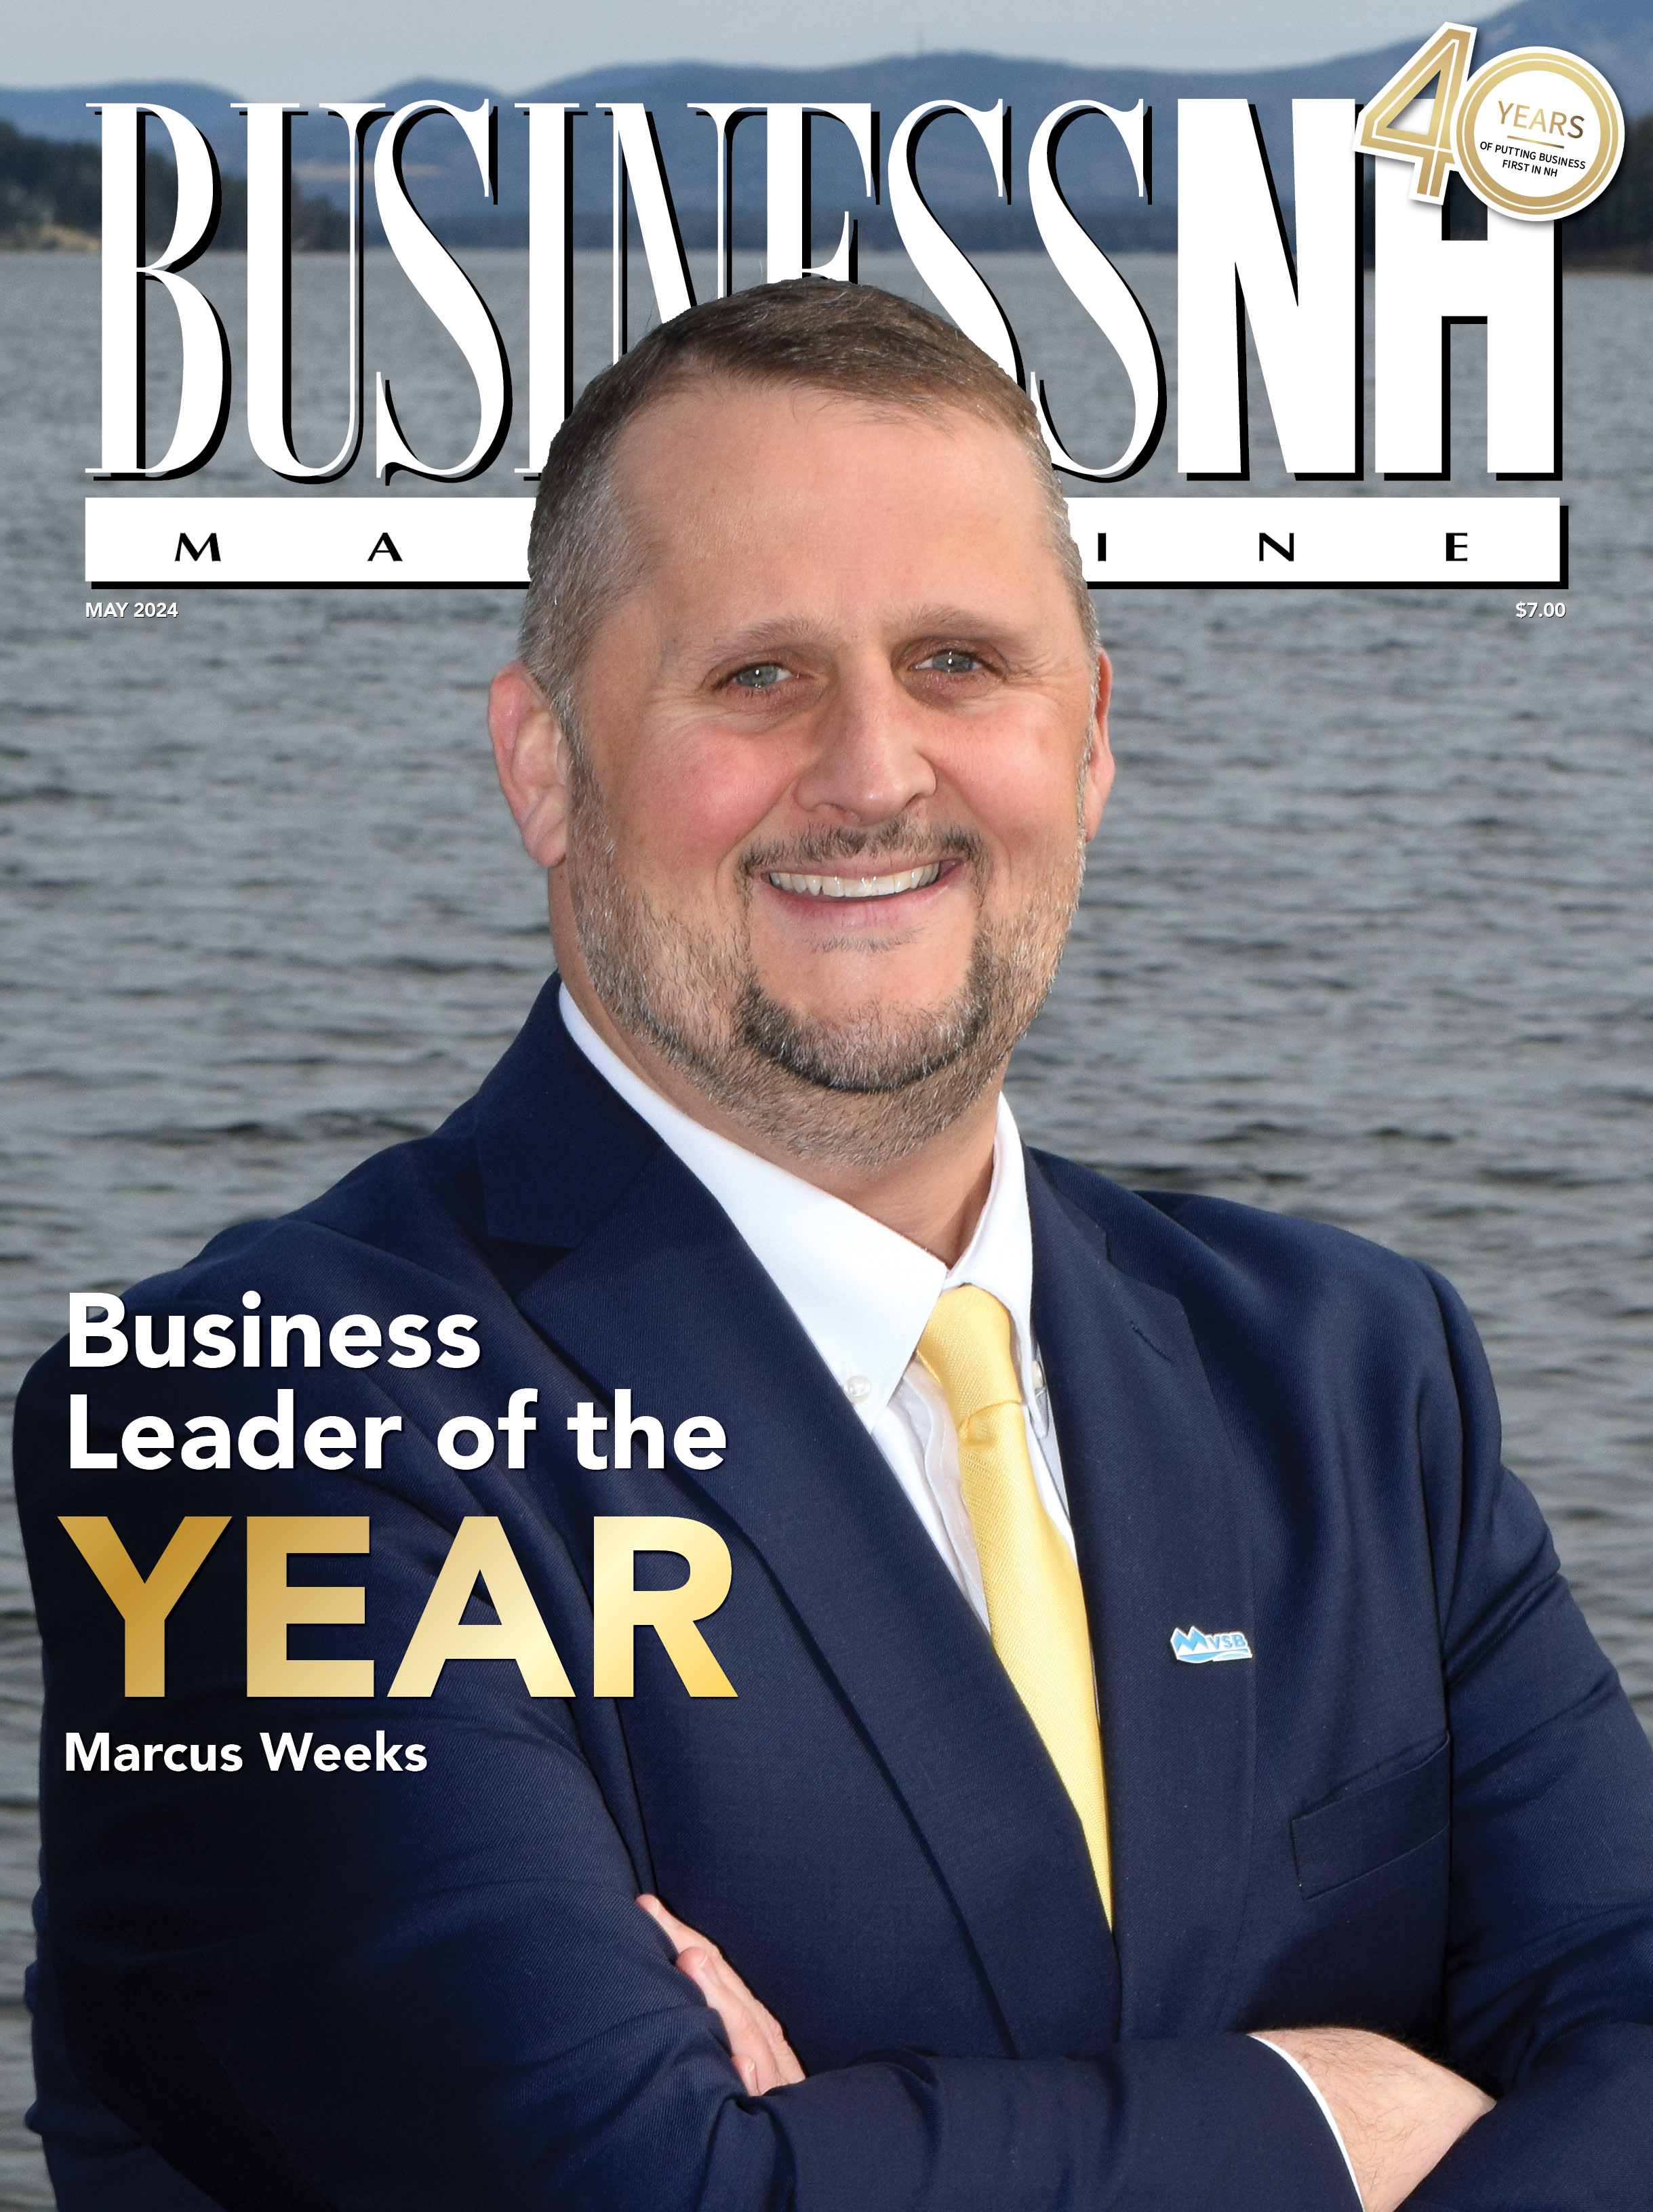 Business NH Magazine Announces 2024 Business Leader, Nonprofit Leader and Businesses of the Year